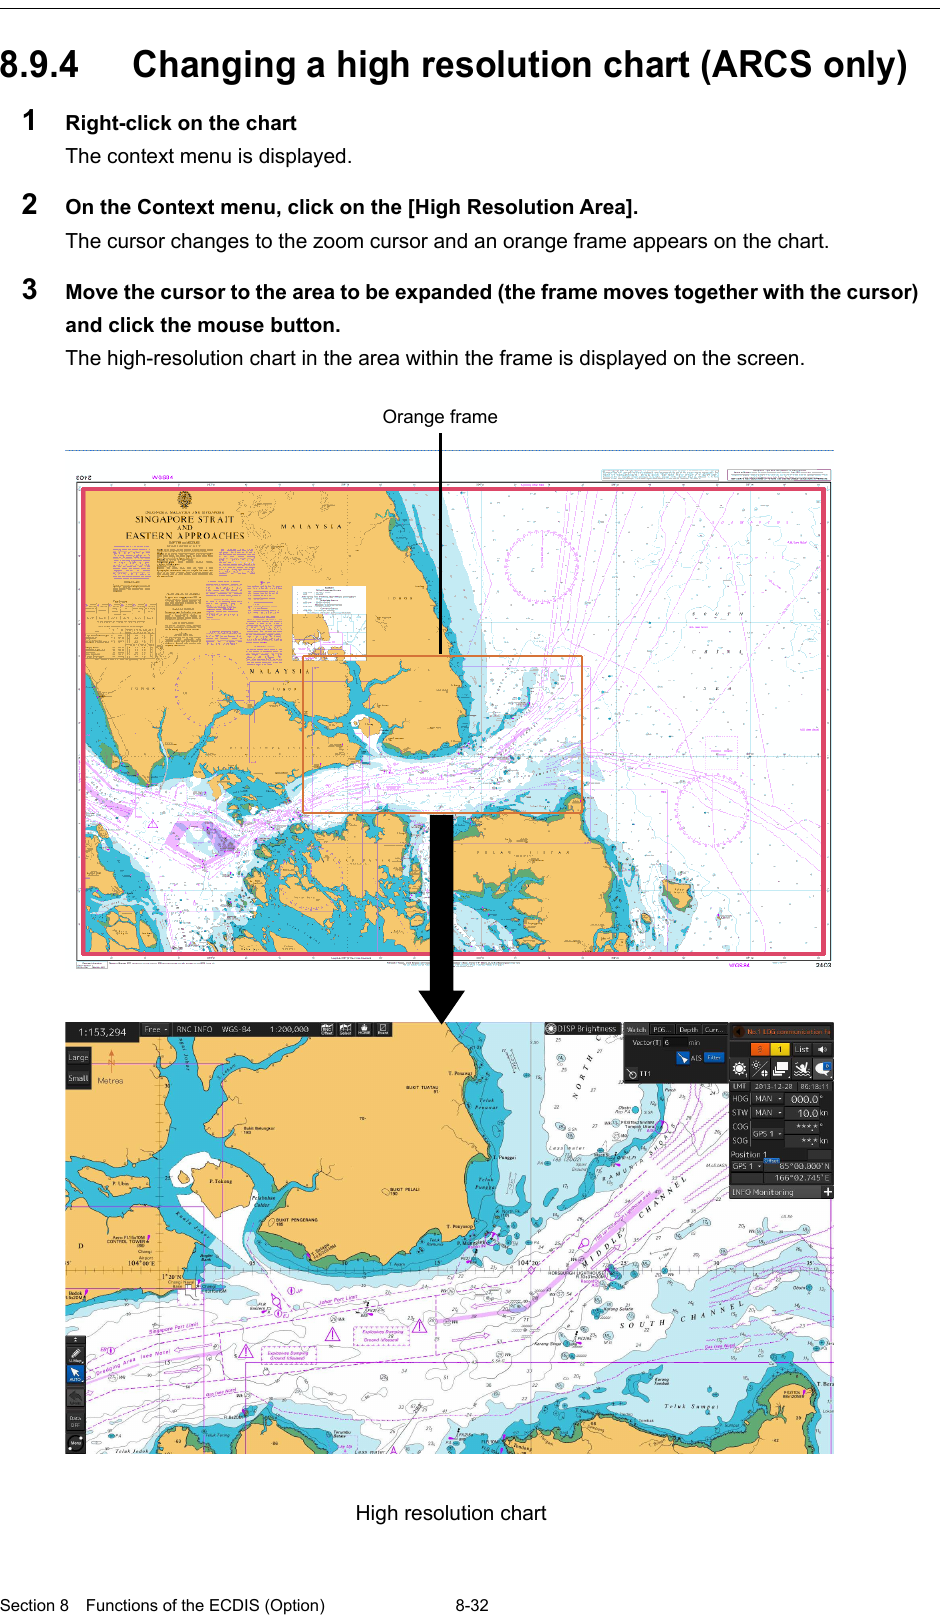  Section 8  Functions of the ECDIS (Option) 8-32  8.9.4 Changing a high resolution chart (ARCS only) 1  Right-click on the chart The context menu is displayed. 2  On the Context menu, click on the [High Resolution Area]. The cursor changes to the zoom cursor and an orange frame appears on the chart. 3  Move the cursor to the area to be expanded (the frame moves together with the cursor) and click the mouse button. The high-resolution chart in the area within the frame is displayed on the screen.      Orange frame  High resolution chart   